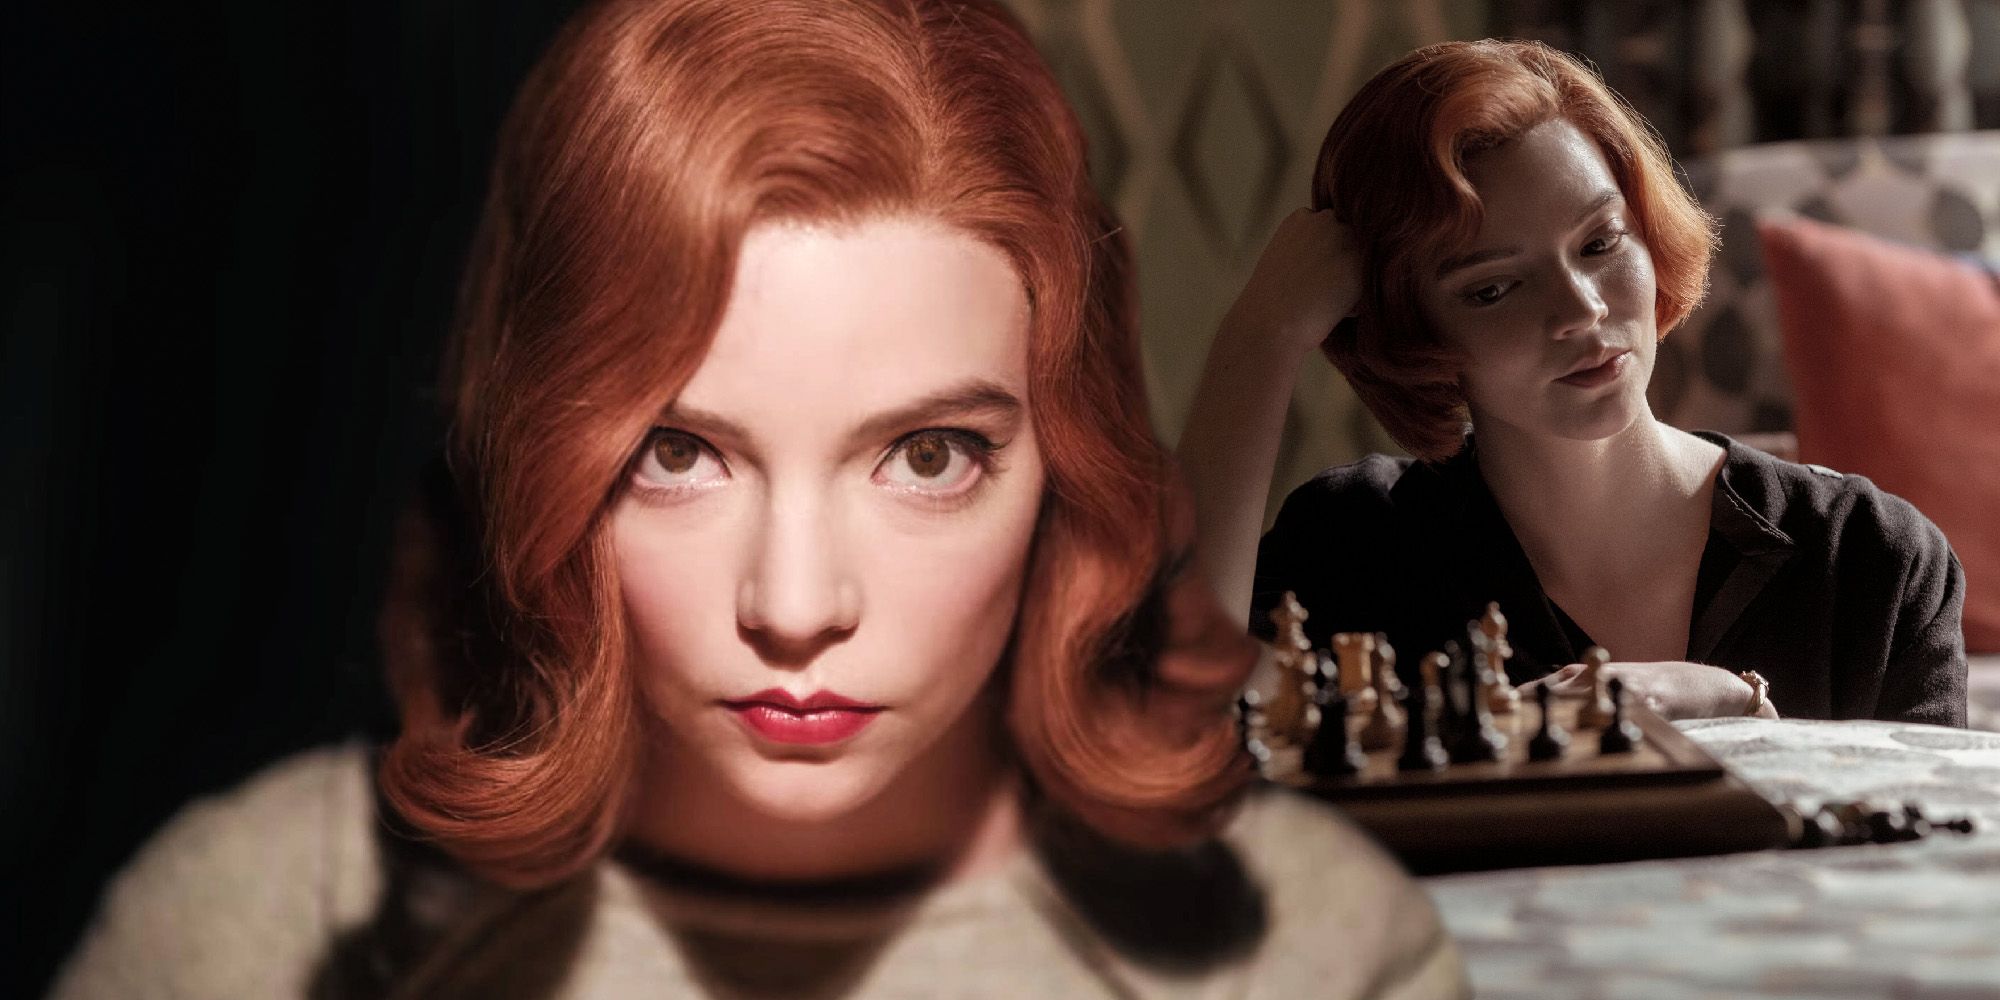 A set of Anya Taylor Joy in the queen's maneuver with the chess pieces and looks into the camera